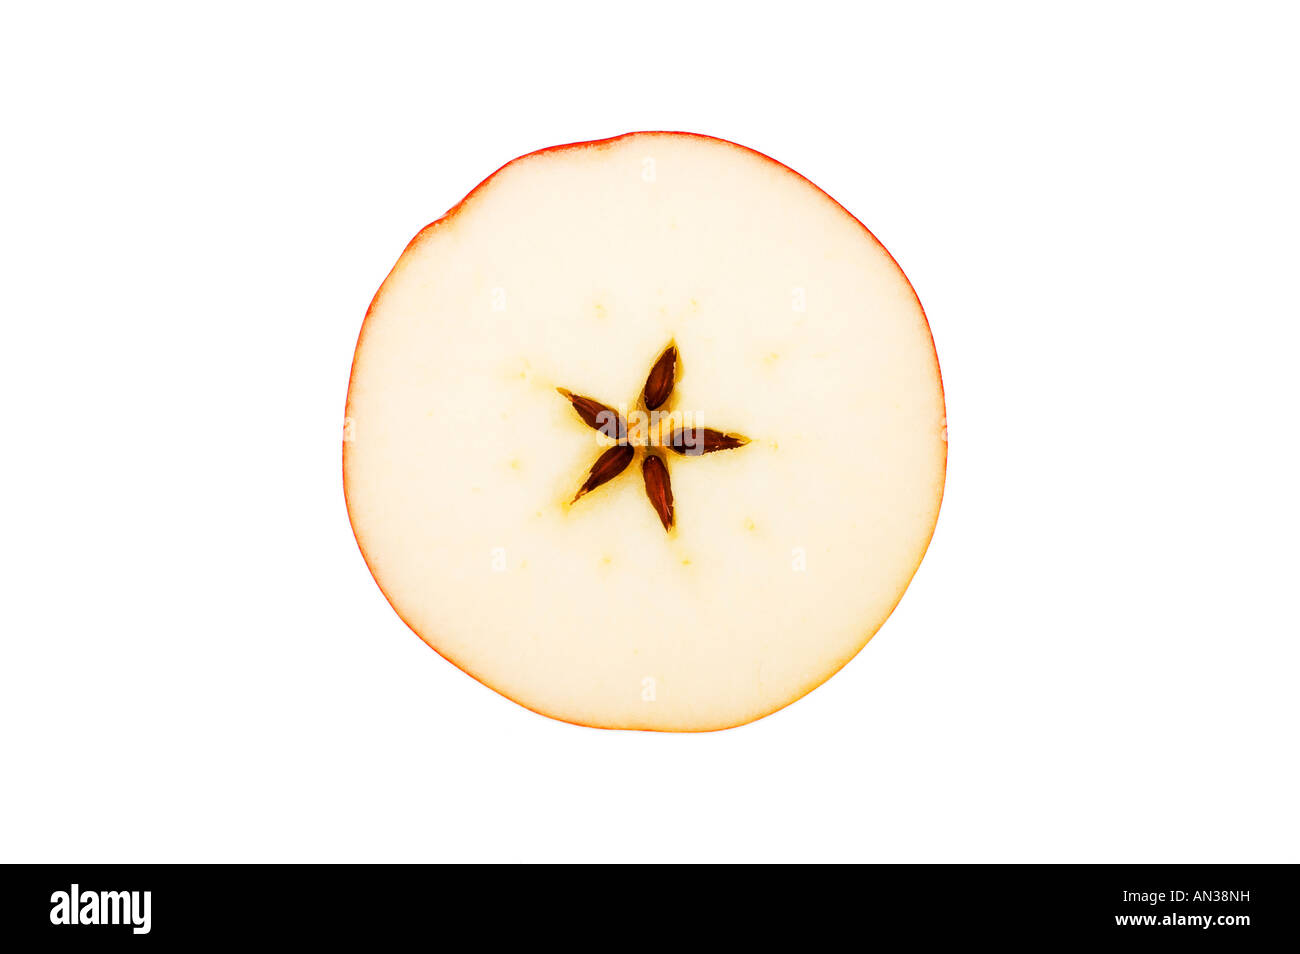 christmas motive cross section of red apple on white background Stock Photo